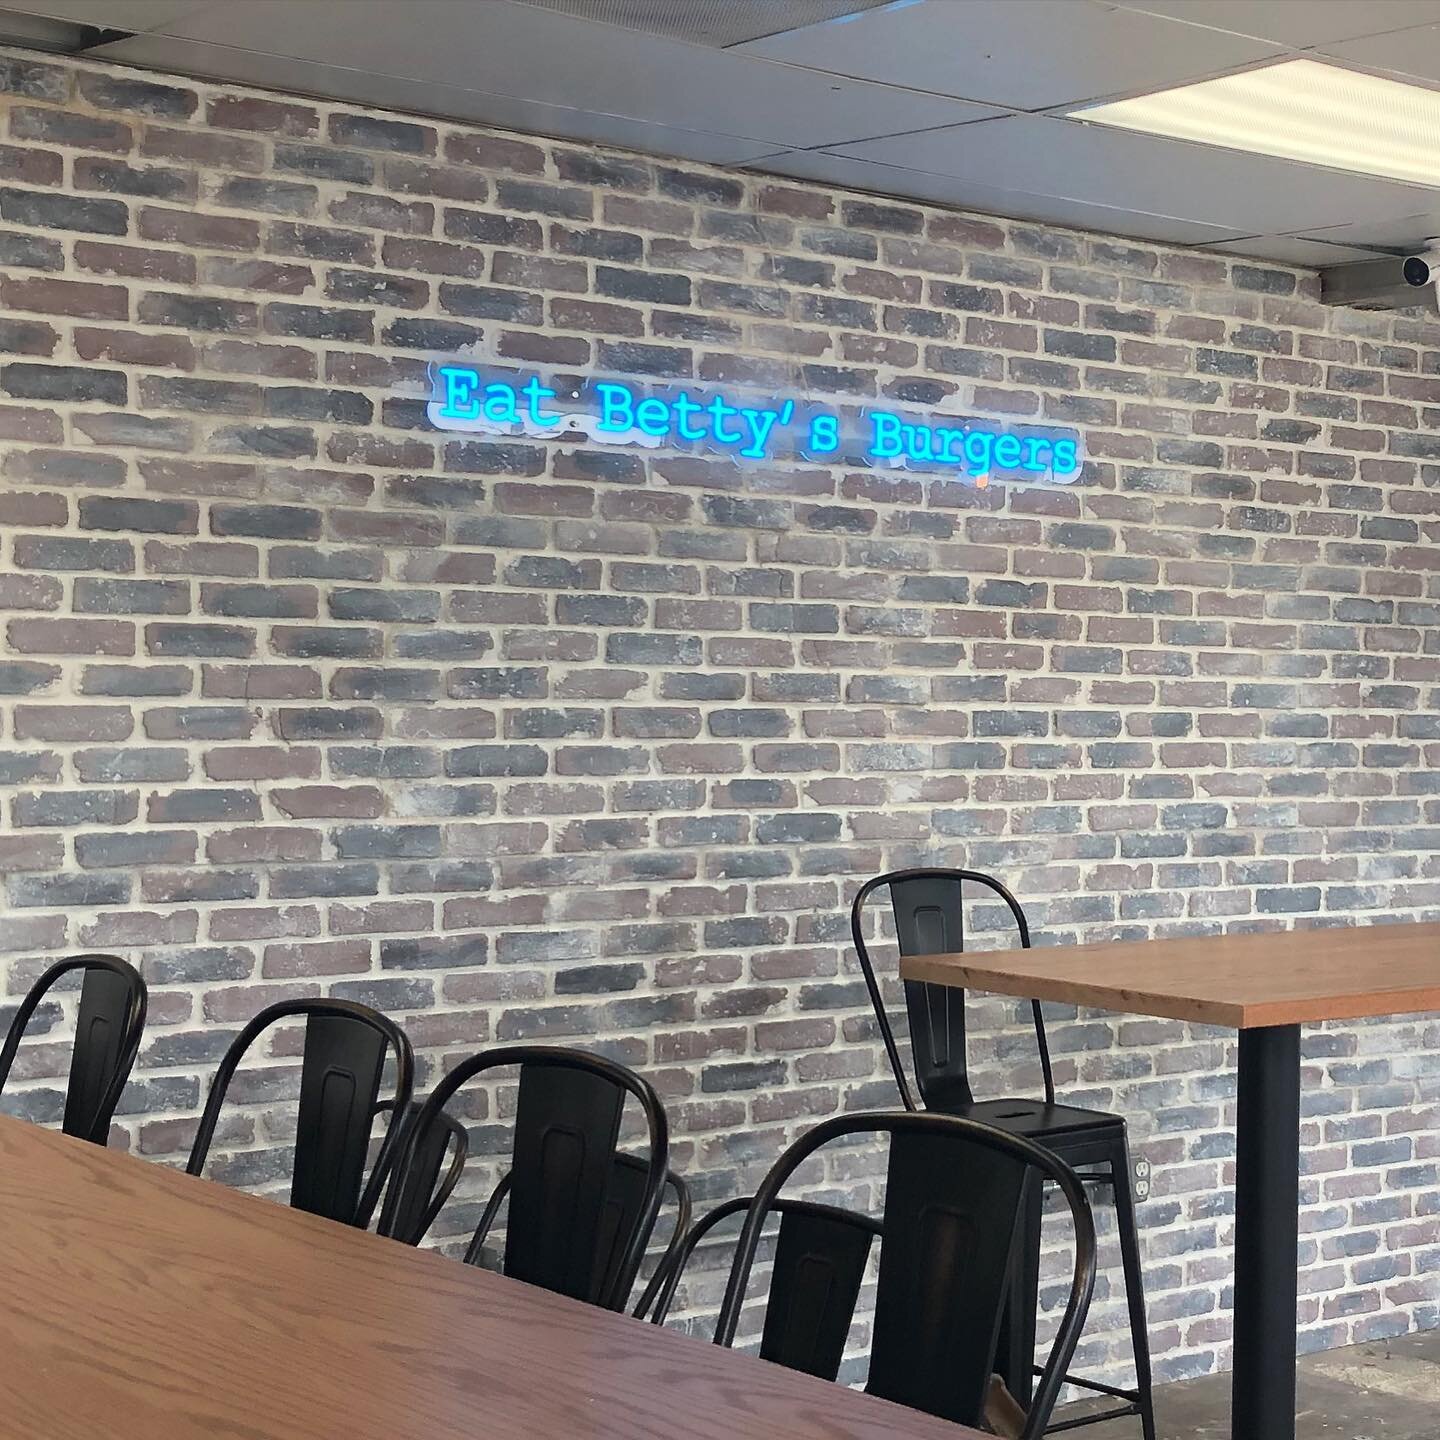 We&rsquo;re super excited to share that our interior is almost finished and only a few more weeks until we get to share this vision with everyone! 

Our custom neon sign behind the community table will be the perfect photo op upon opening! Who&rsquo;